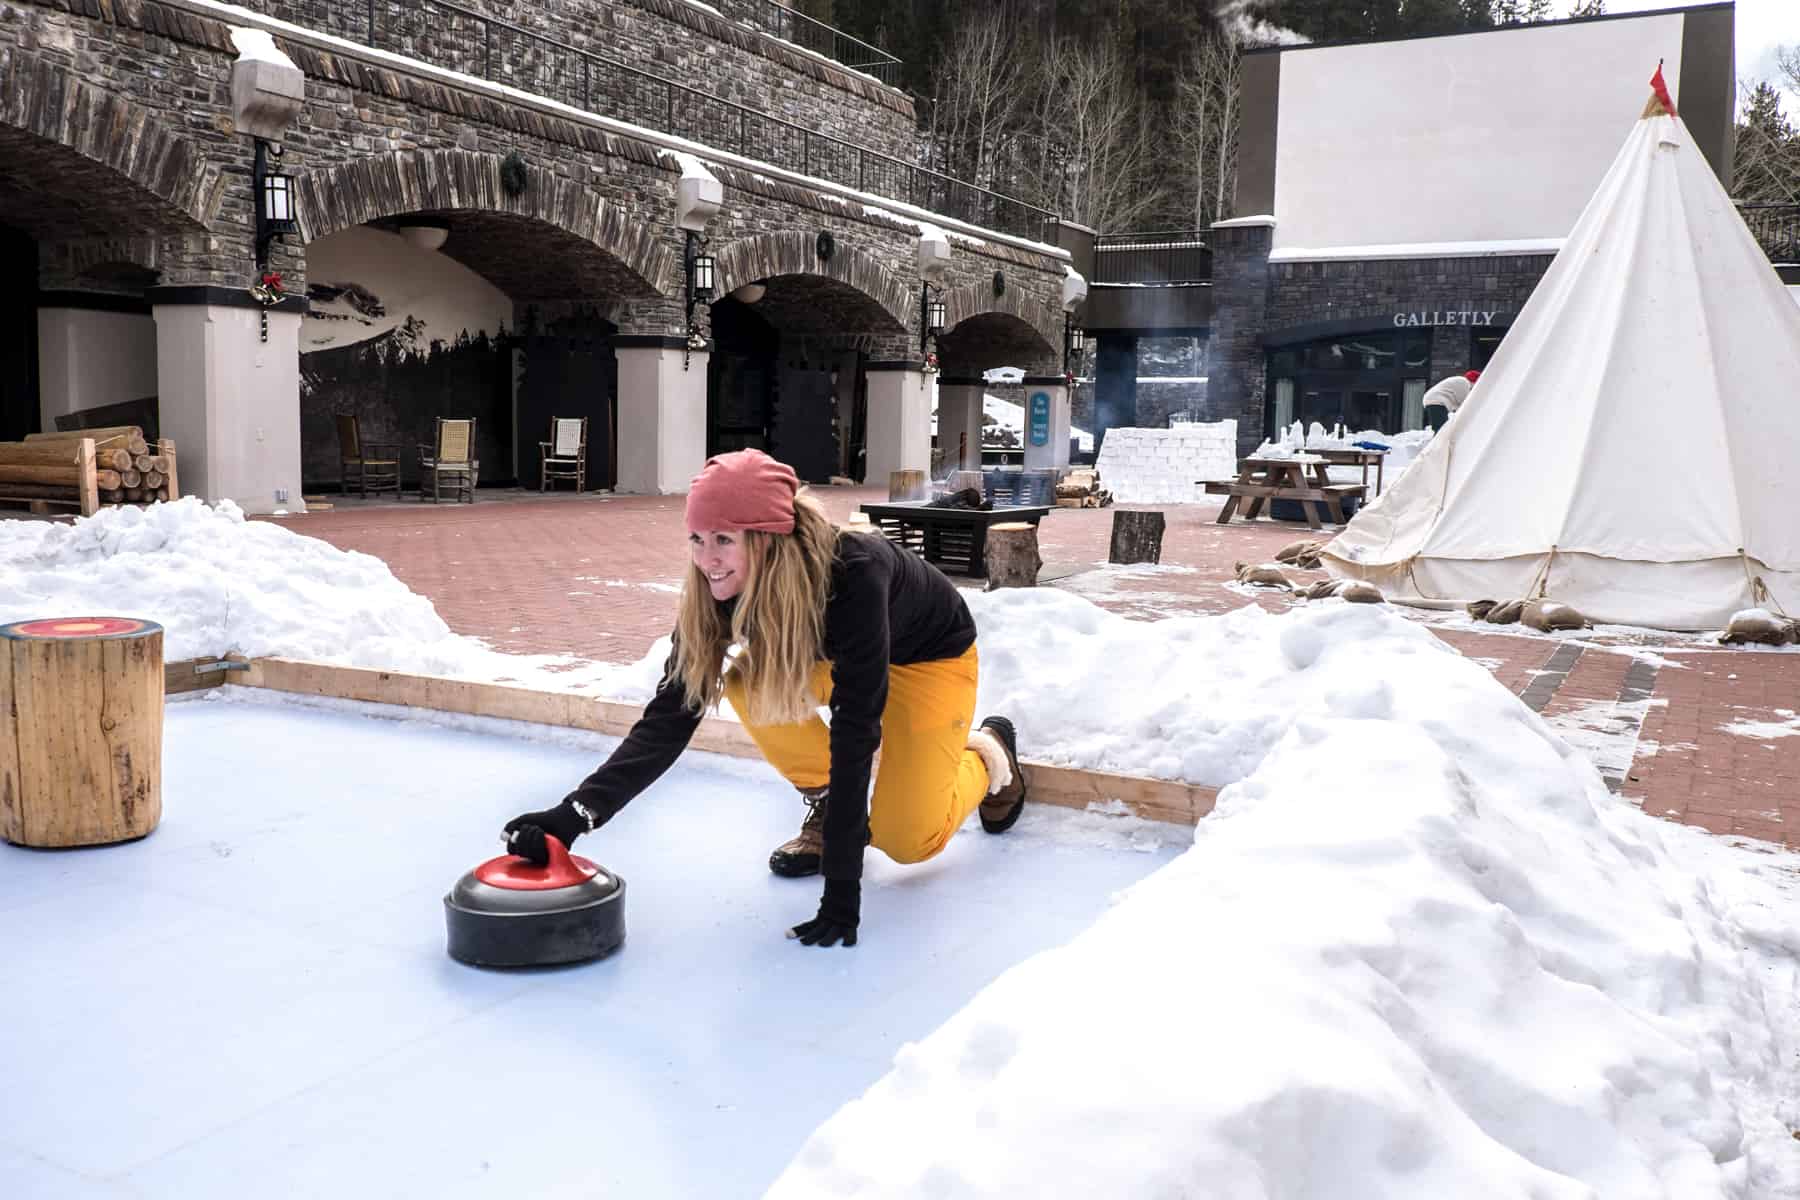 A woman dressed in black and yellow, and wearing a pink hat tries curling on a small ice rink in Banff, Canada. 